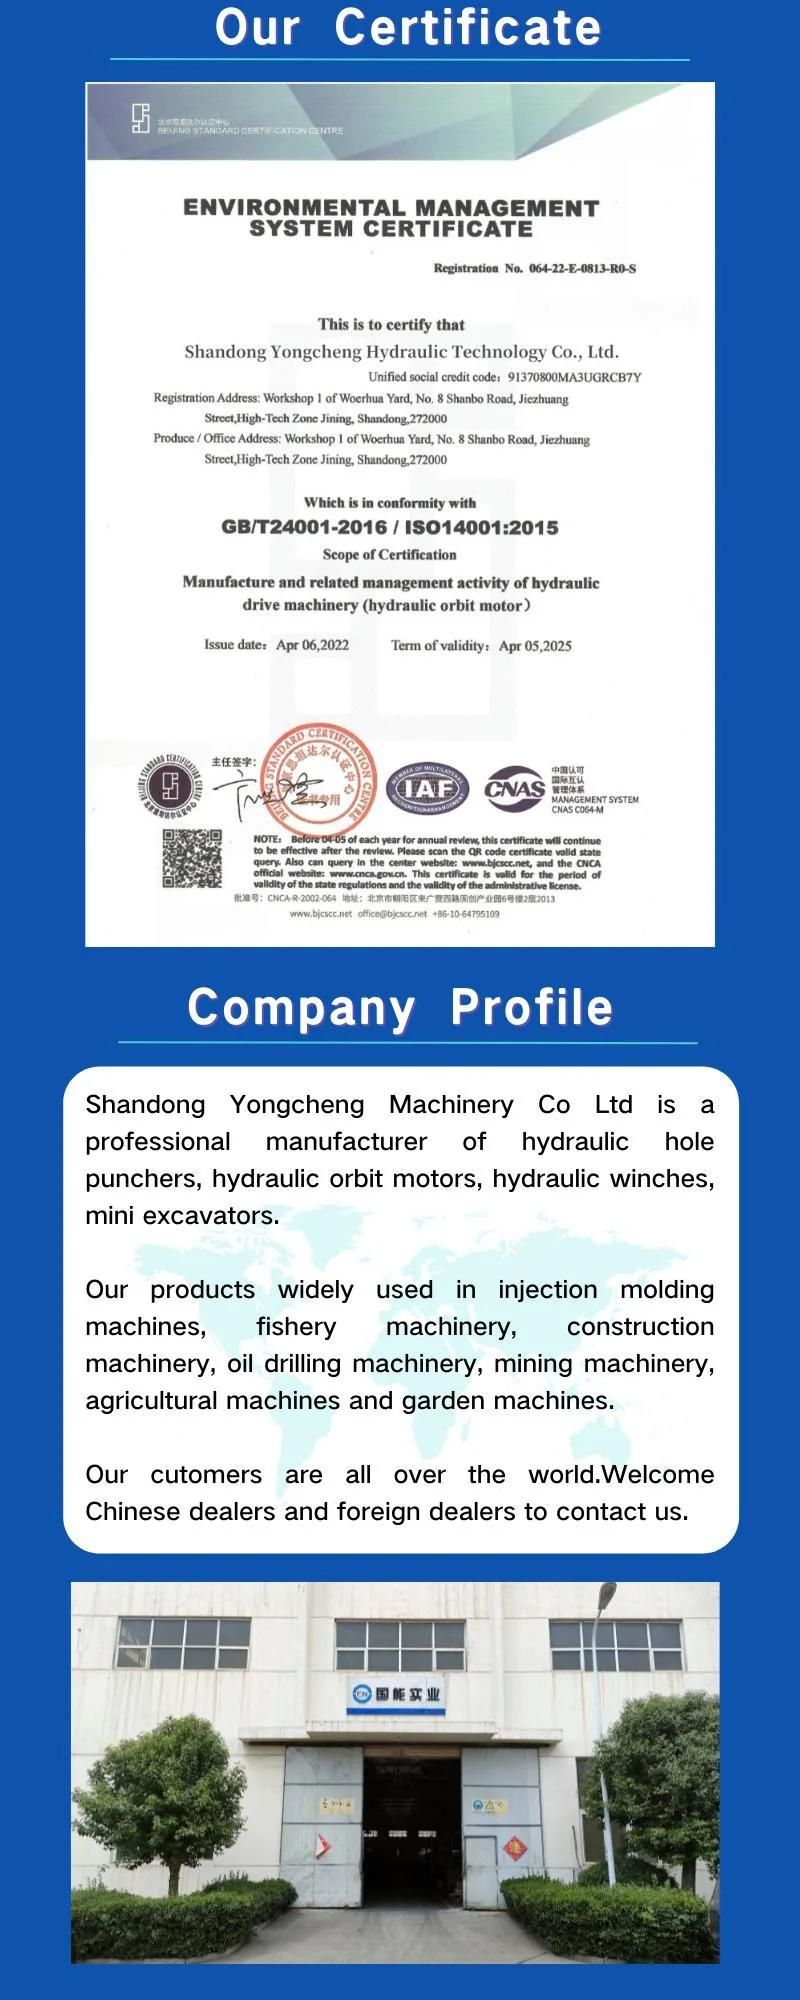 EXW Price Hydraulic Cycloid Compact Disc Valve Bearingless Piston Plunger Motor Bm Series BMP/Bmr/Bmh/Bm6-195/245/310/395/490/625/800/985